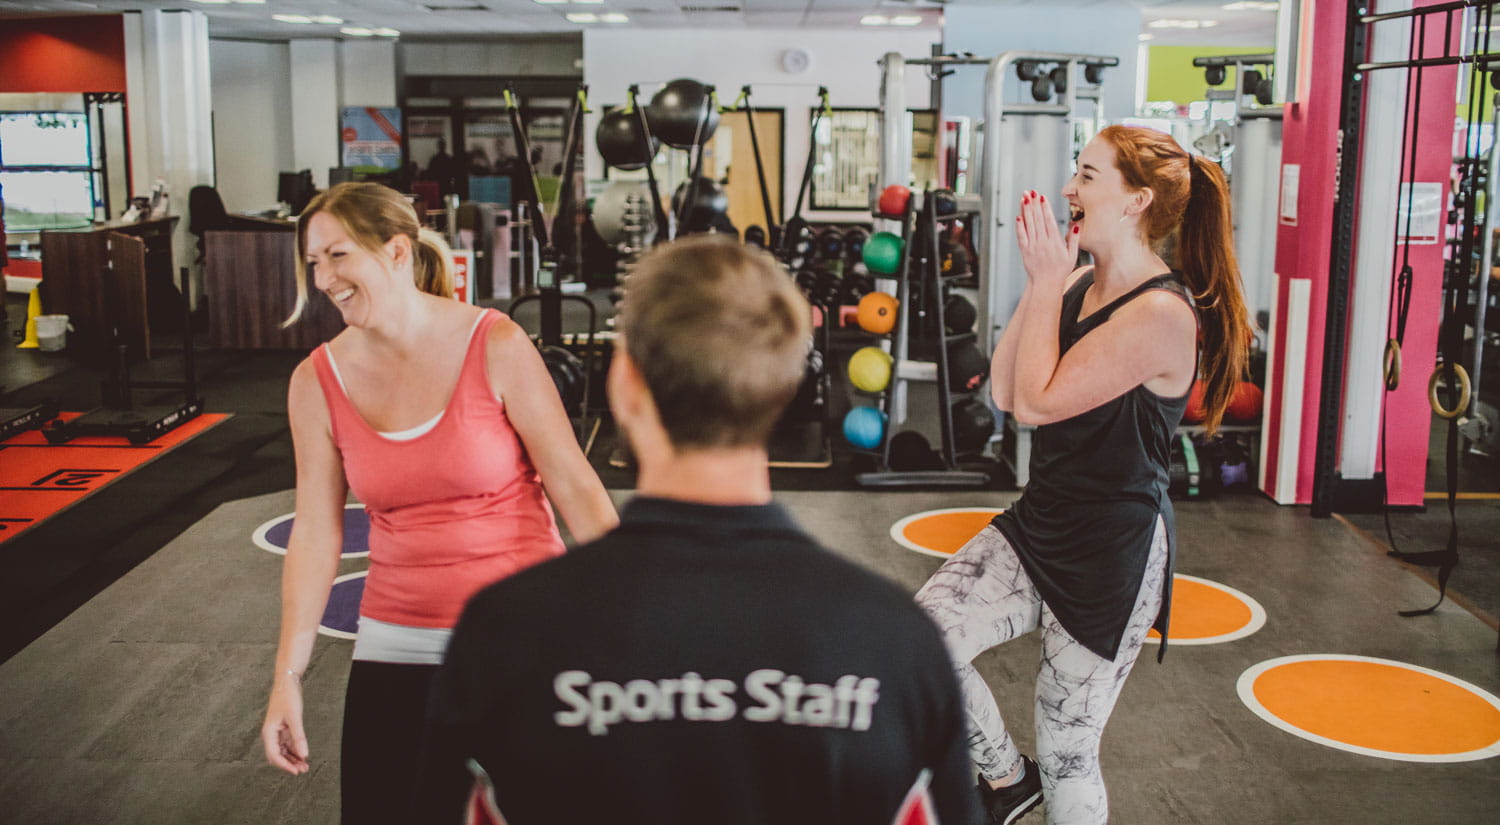 Two people enjoying a personal training session in the gym